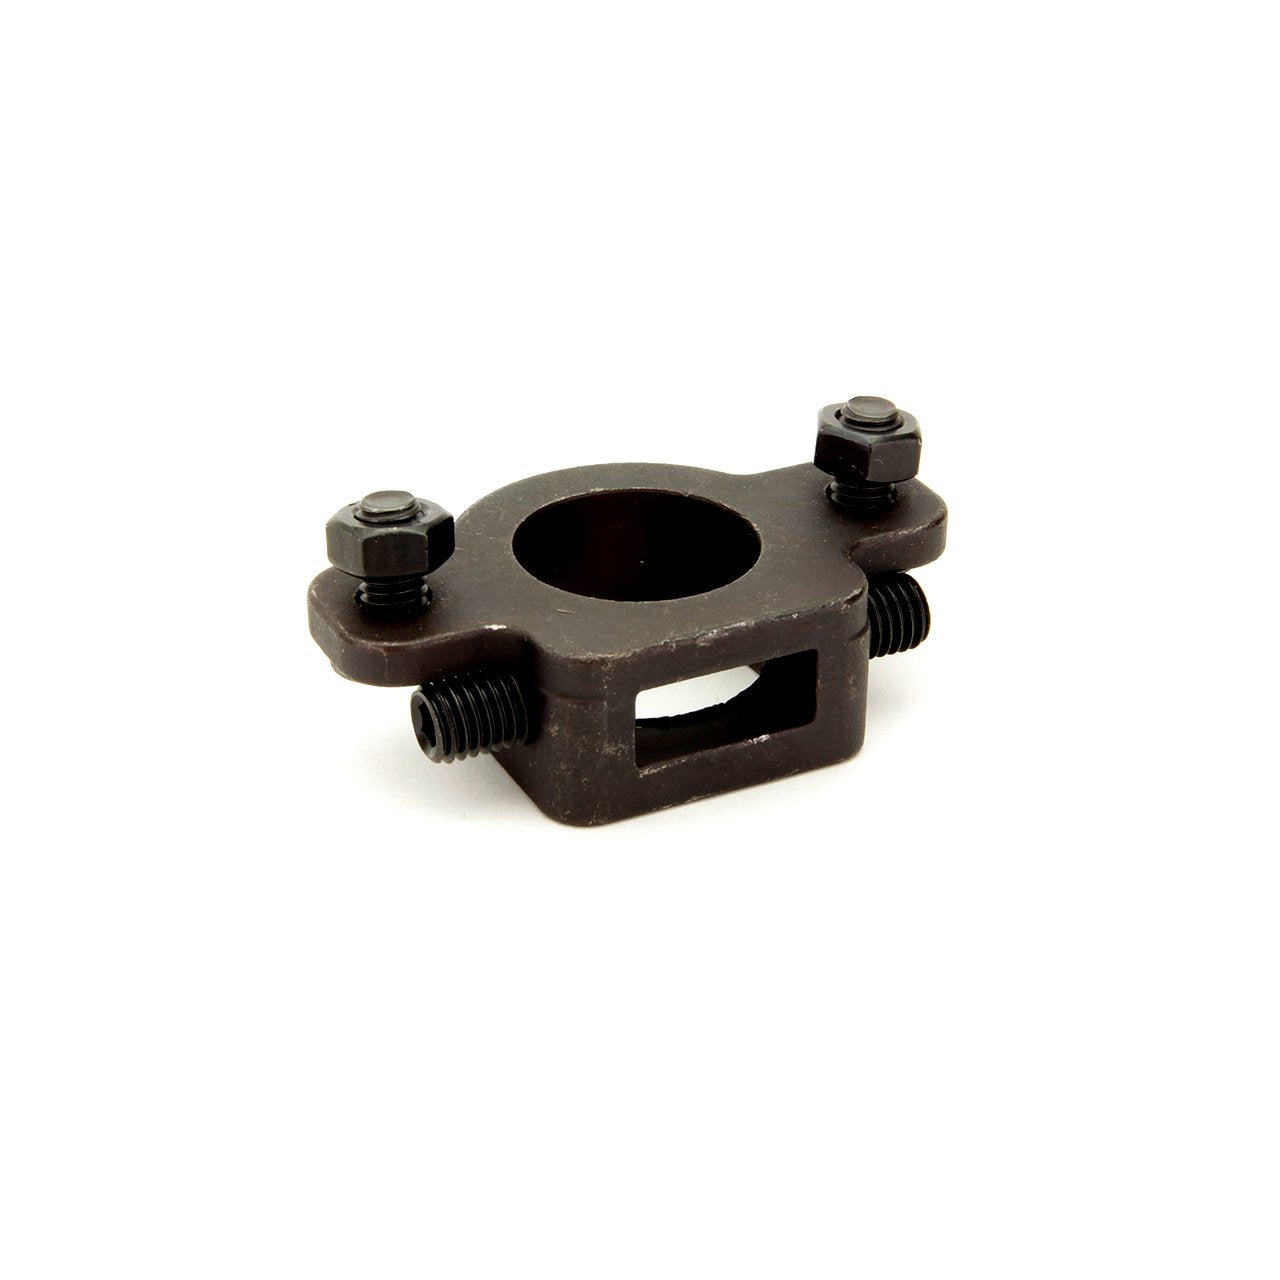 Bracket and Screw, used with M/D Head 224